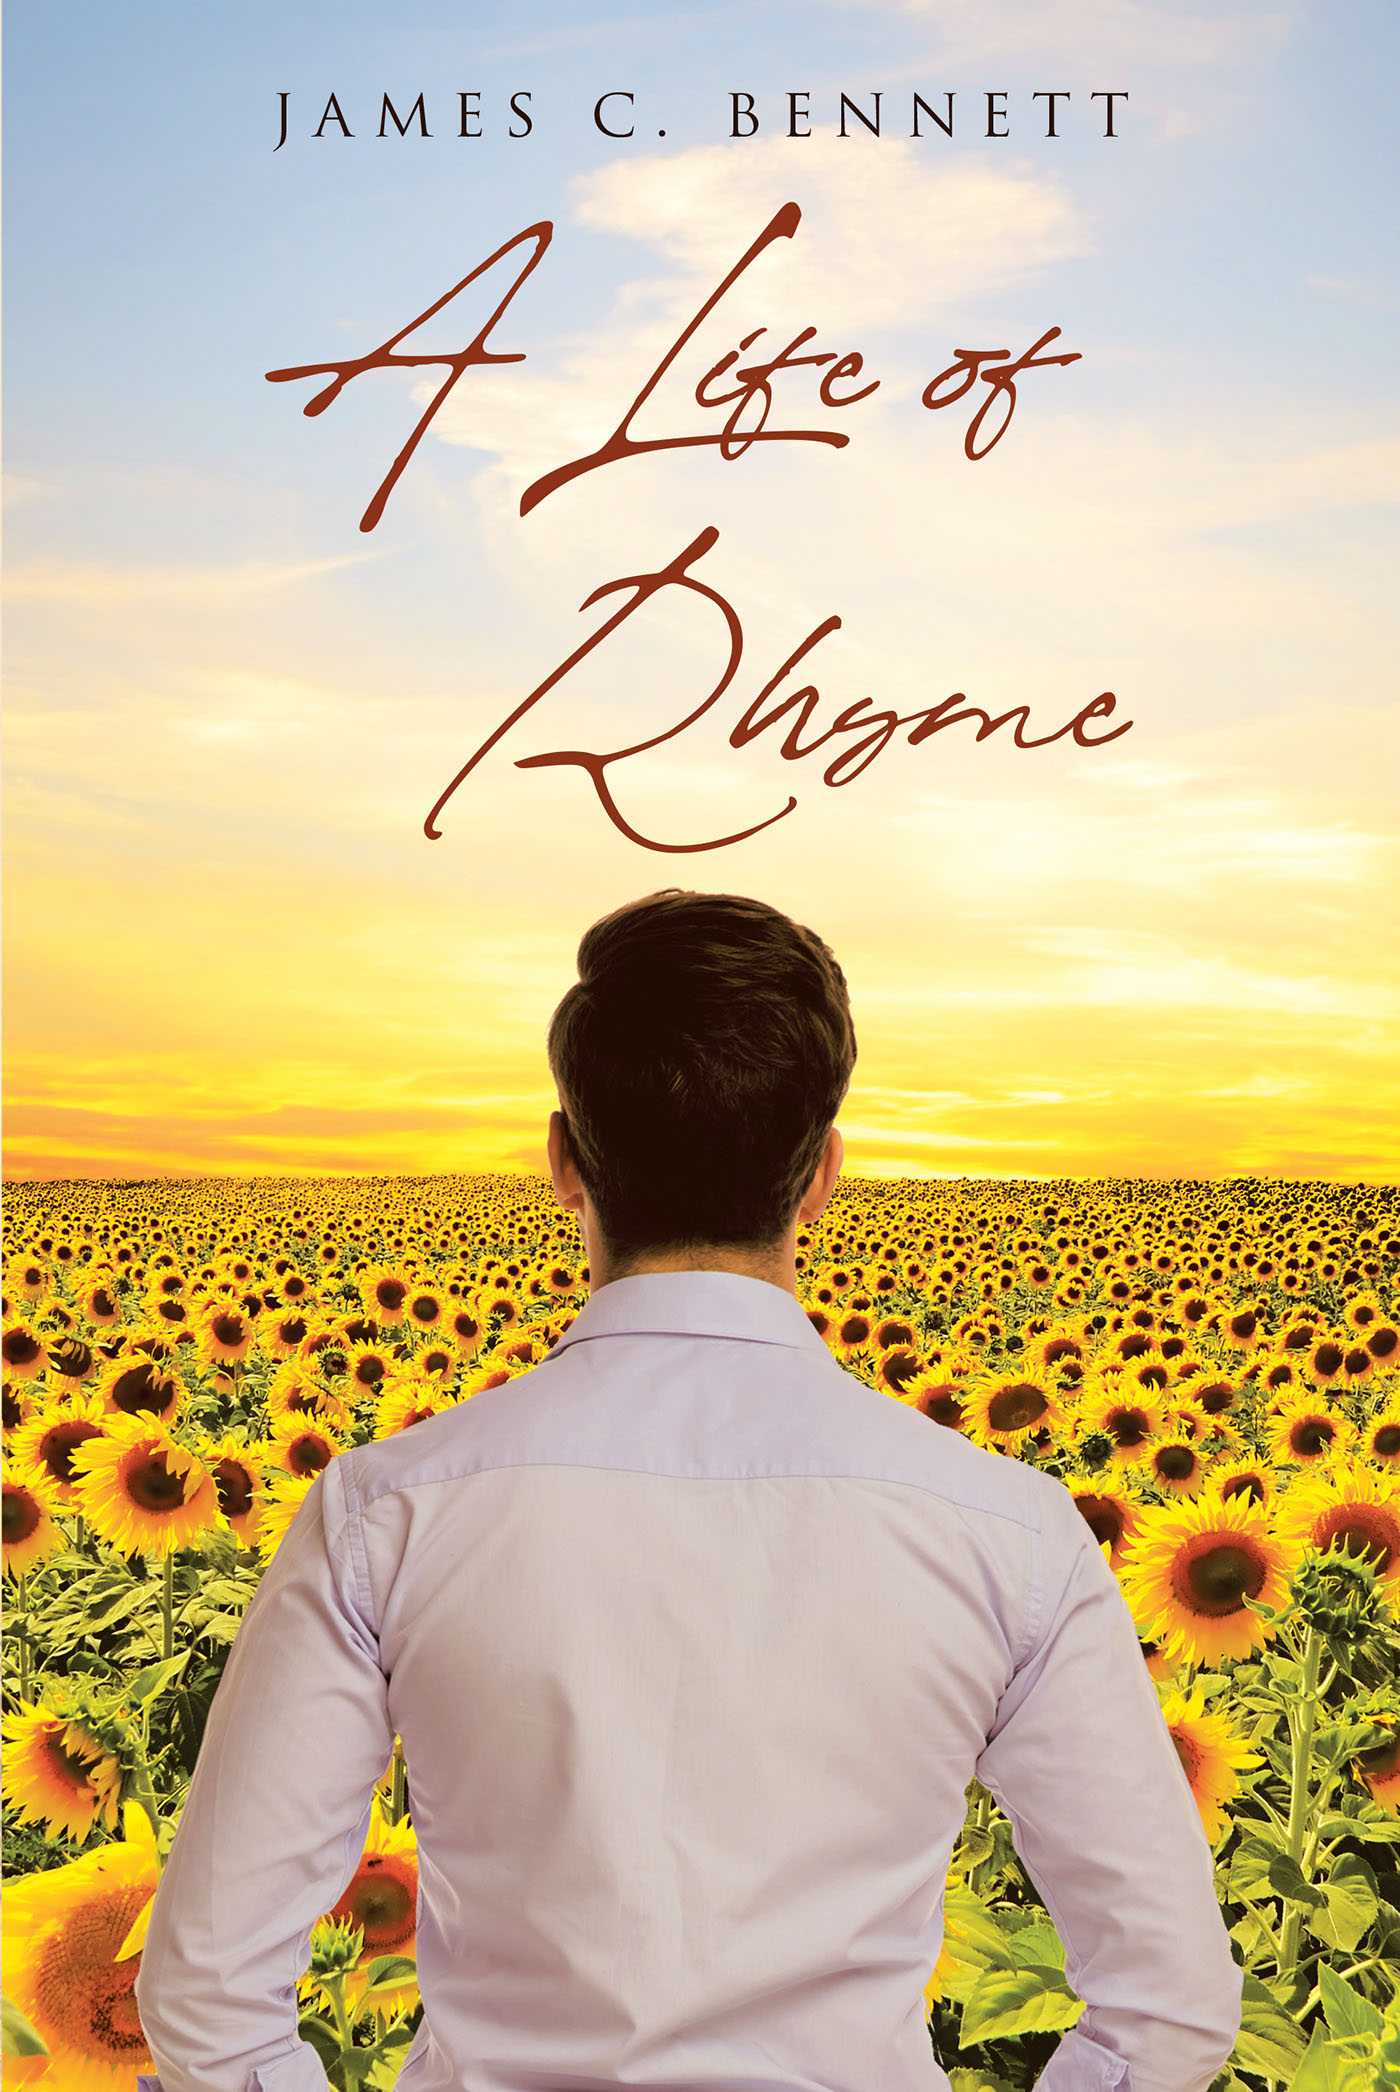 Author James C. Bennett’s New Book, "A Life of Rhyme," is a Captivating & Eye-Opening Assortment of Poems Providing a Glimpse Into the Author's Moods & Emotions